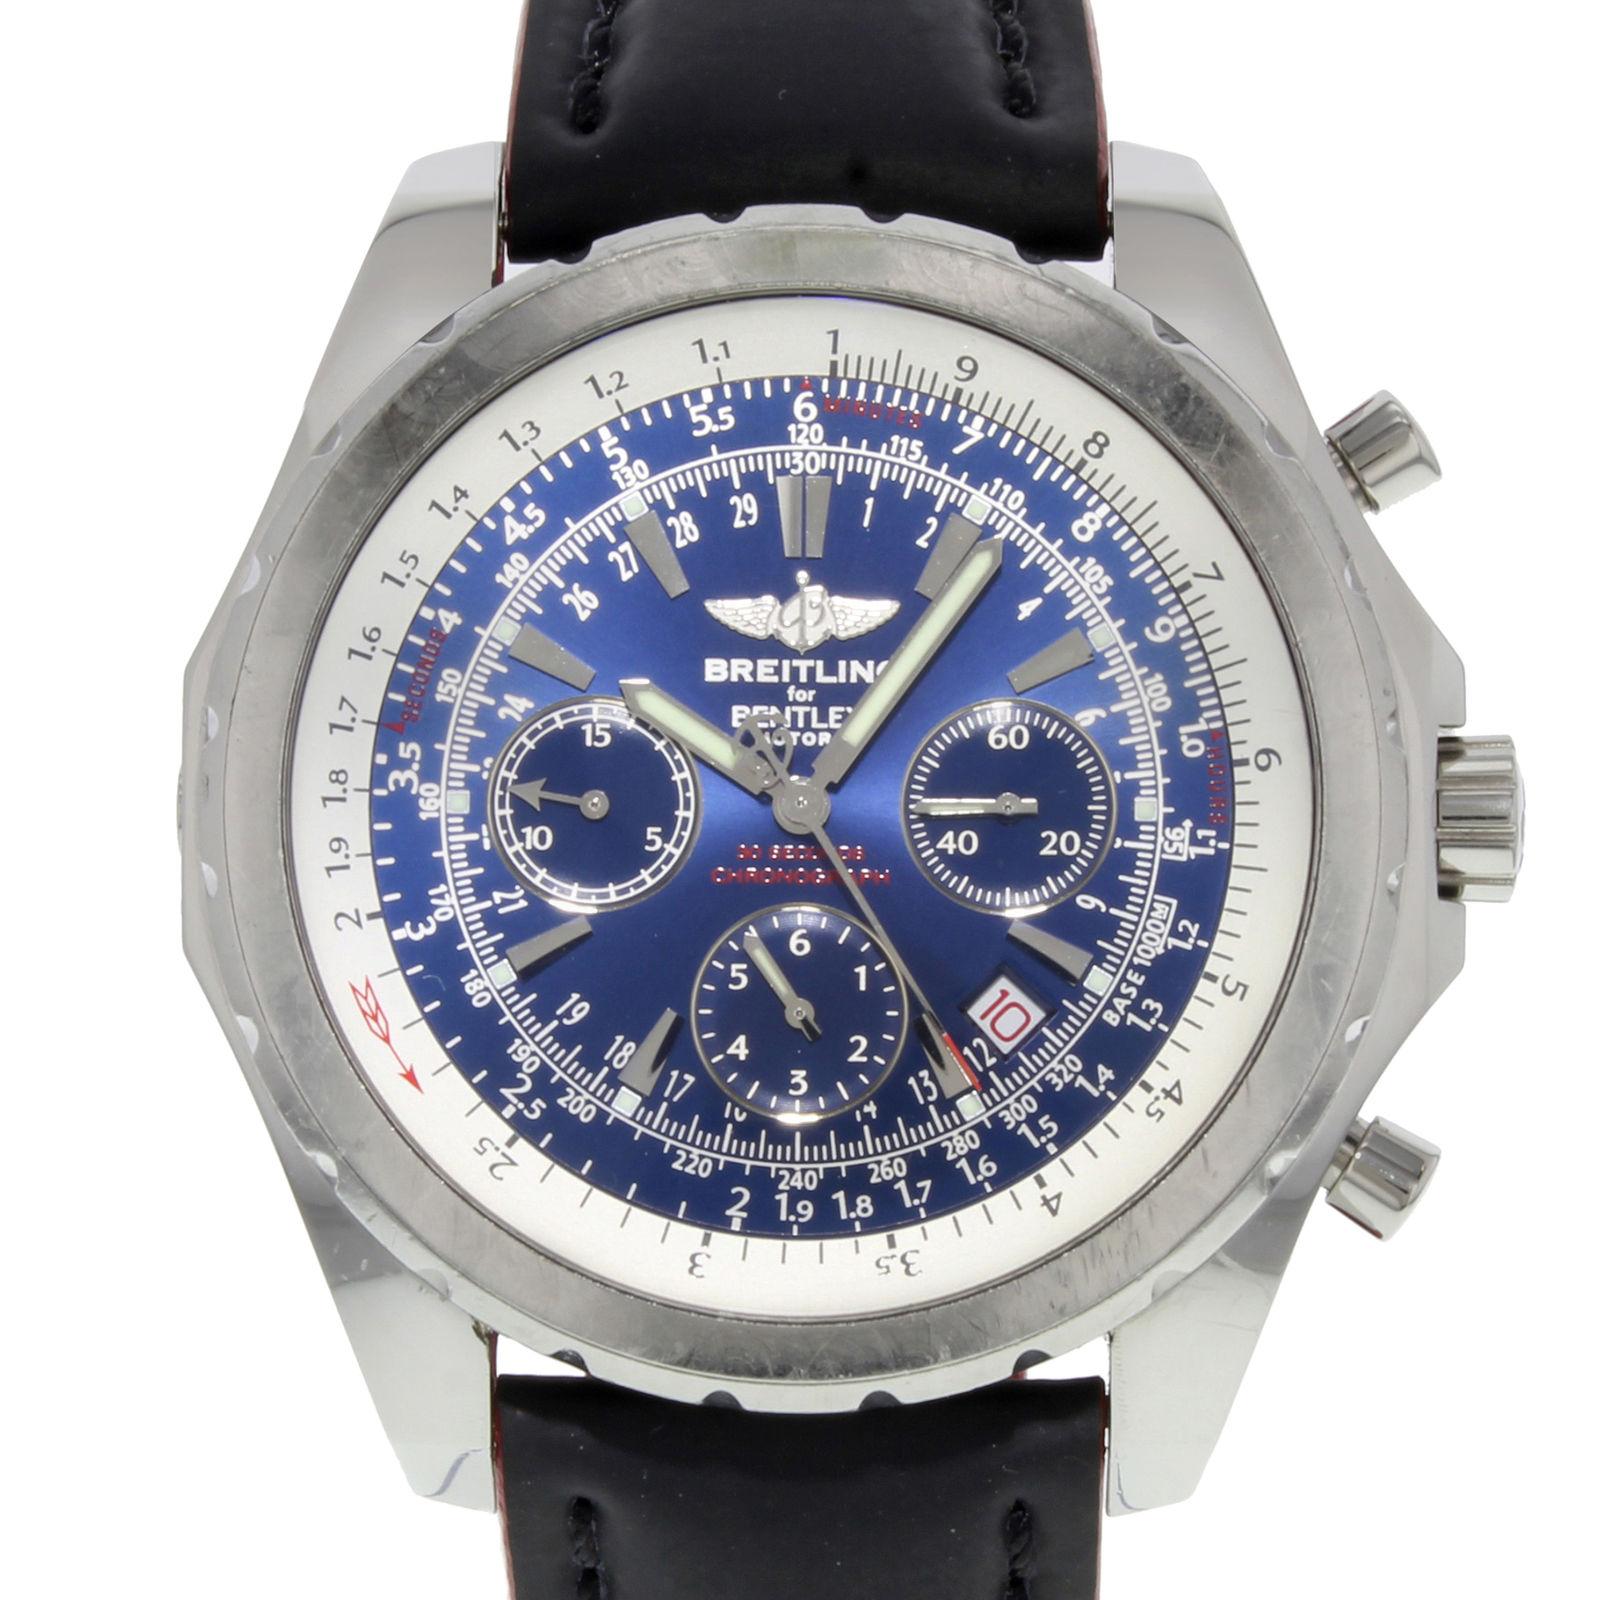 This pre-owned Breitling Bentley  A25362  is a beautiful men's timepiece that is powered by an automatic movement which is cased in a stainless steel case. It has a round shape face, chronograph, date, small seconds subdial dial and has hand sticks